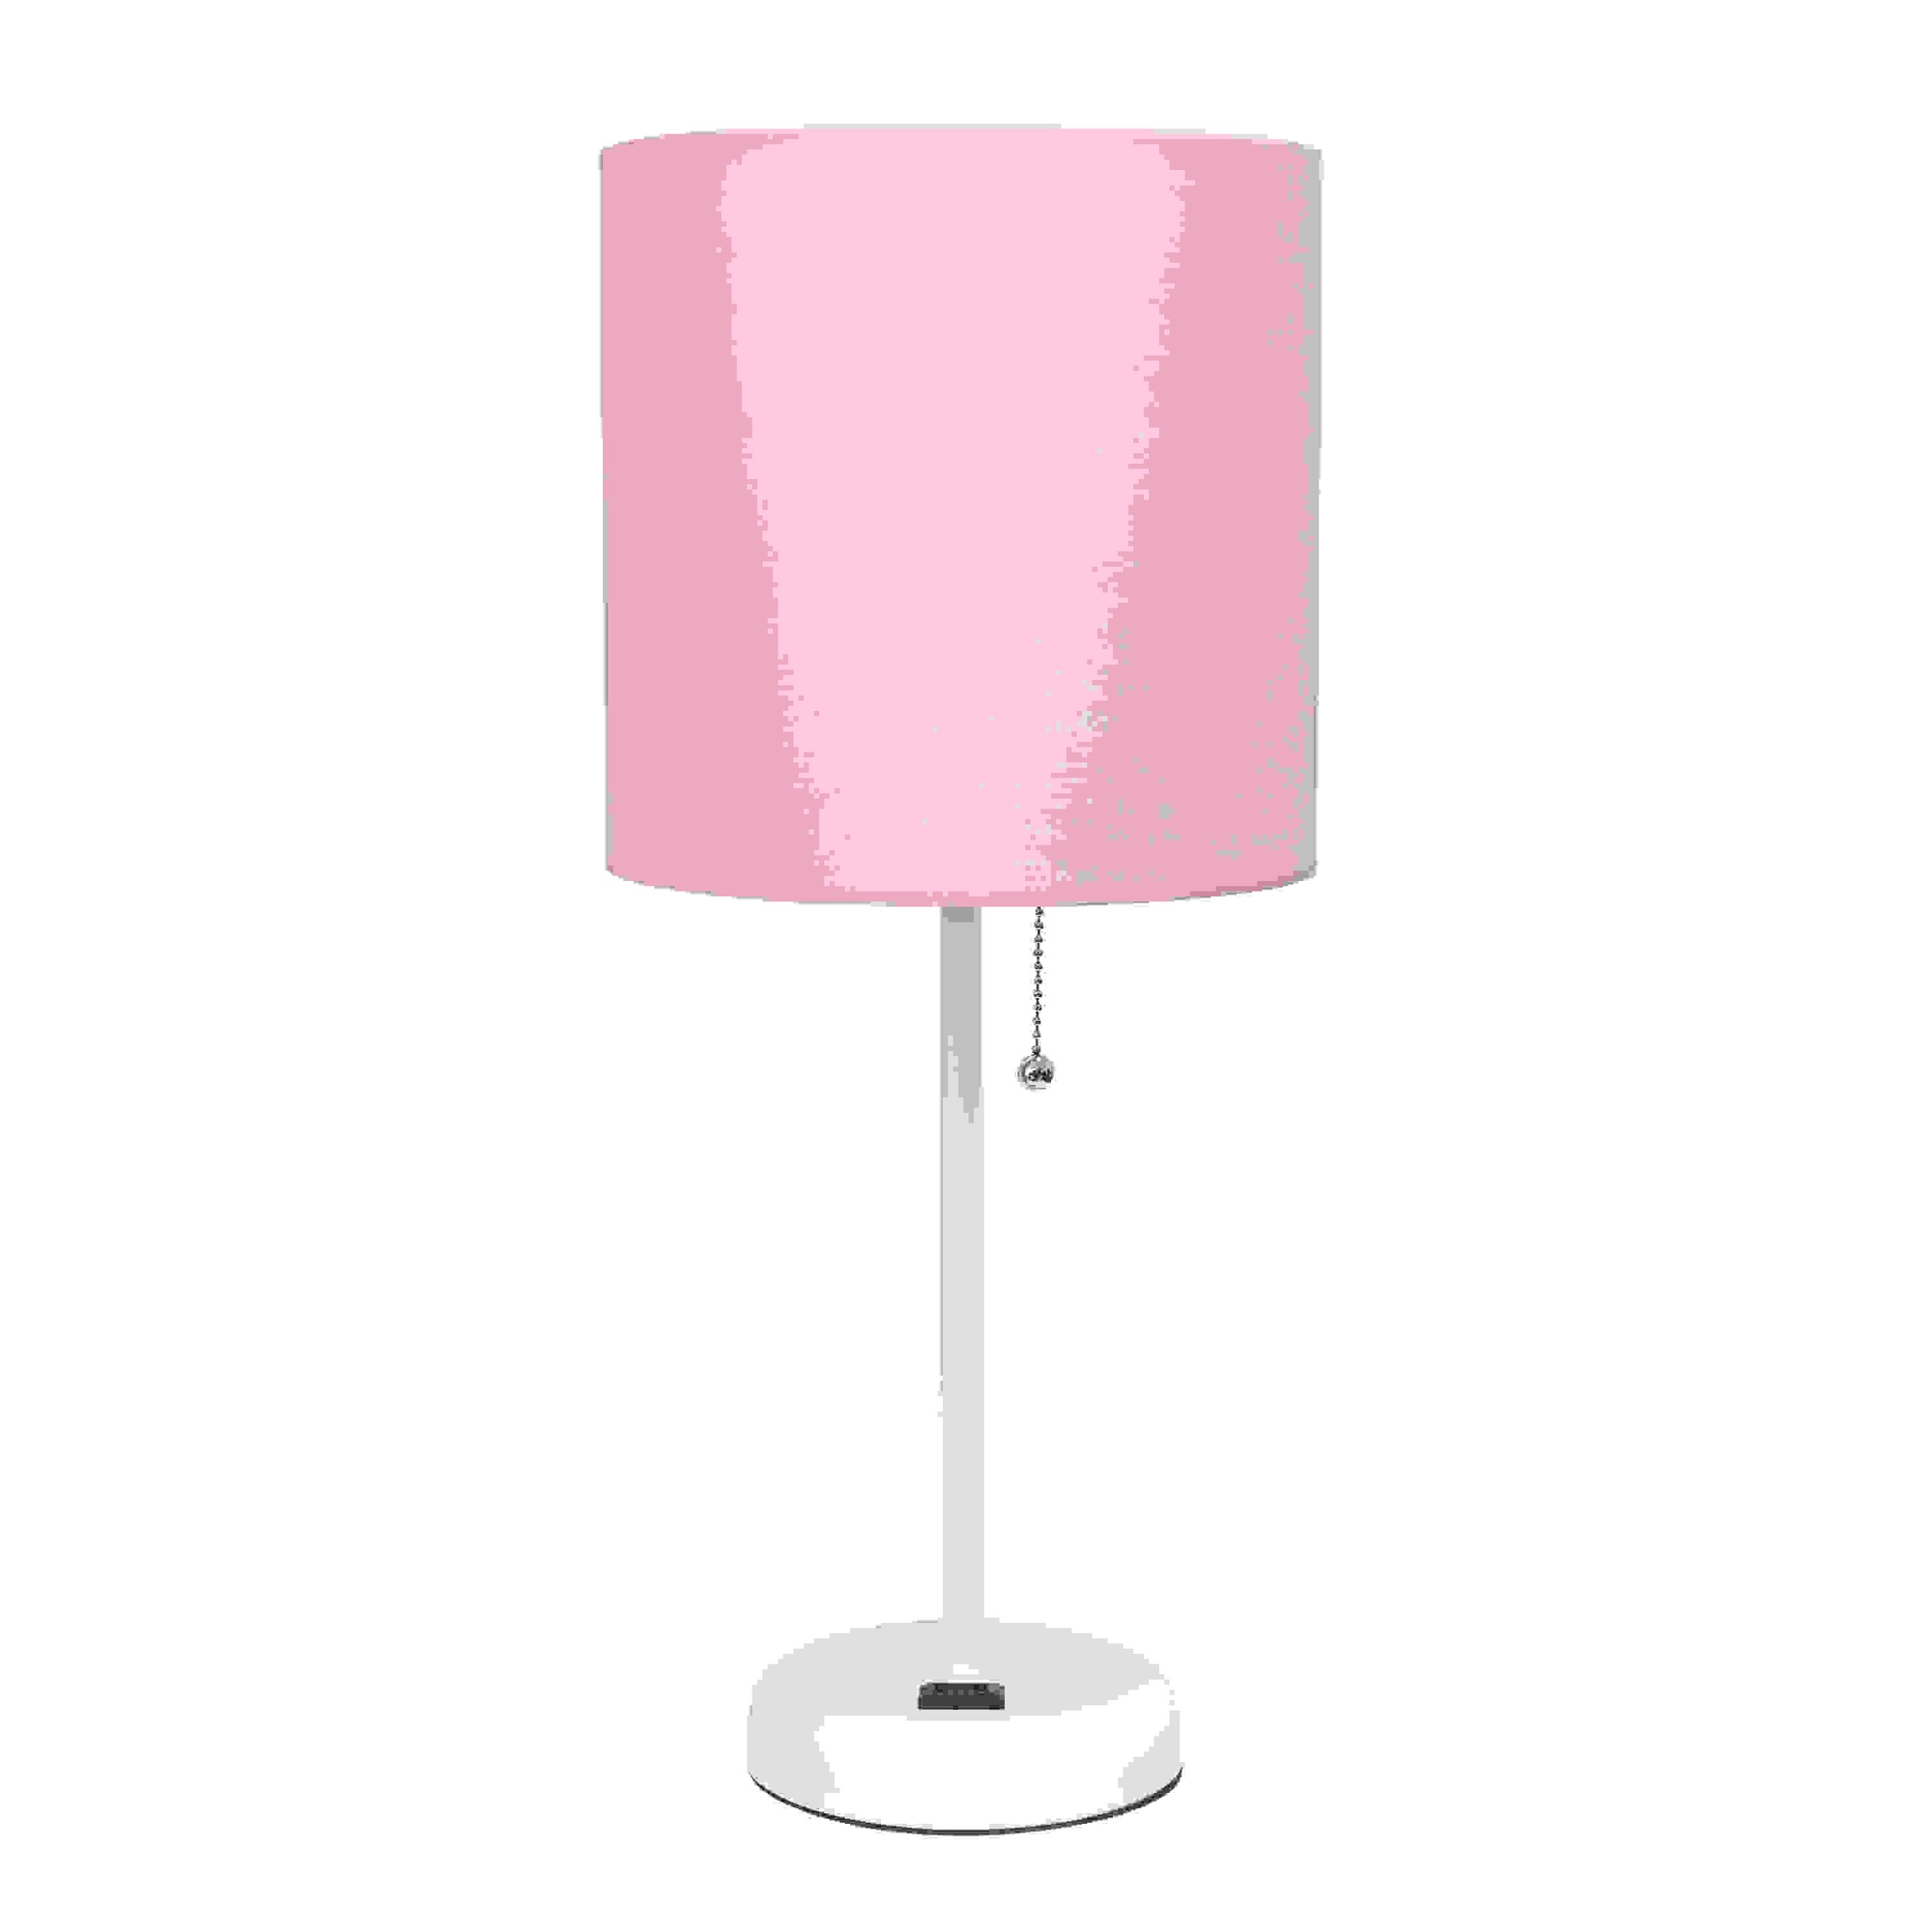 Simple Designs White Stick Lamp with Charging Outlet and Fabric Shade, Pink